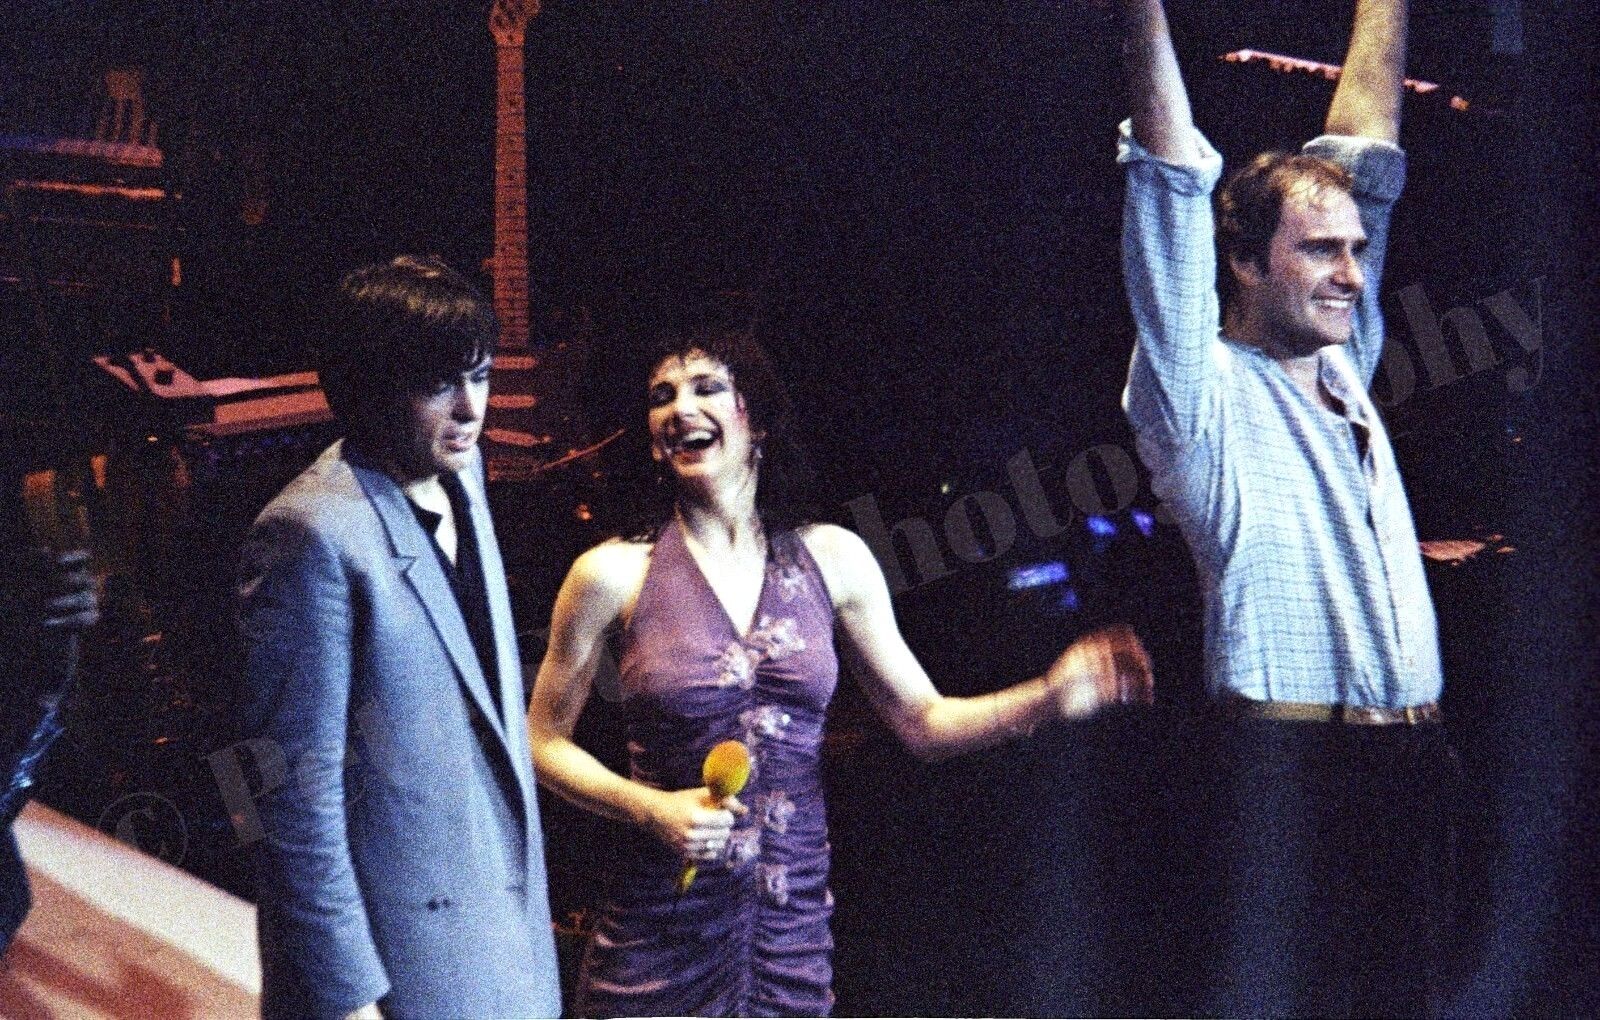 KATE BUSH (with PETER GABRIEL & STEVE HARLEY) in concert 1979 30 RARE PHOTOS